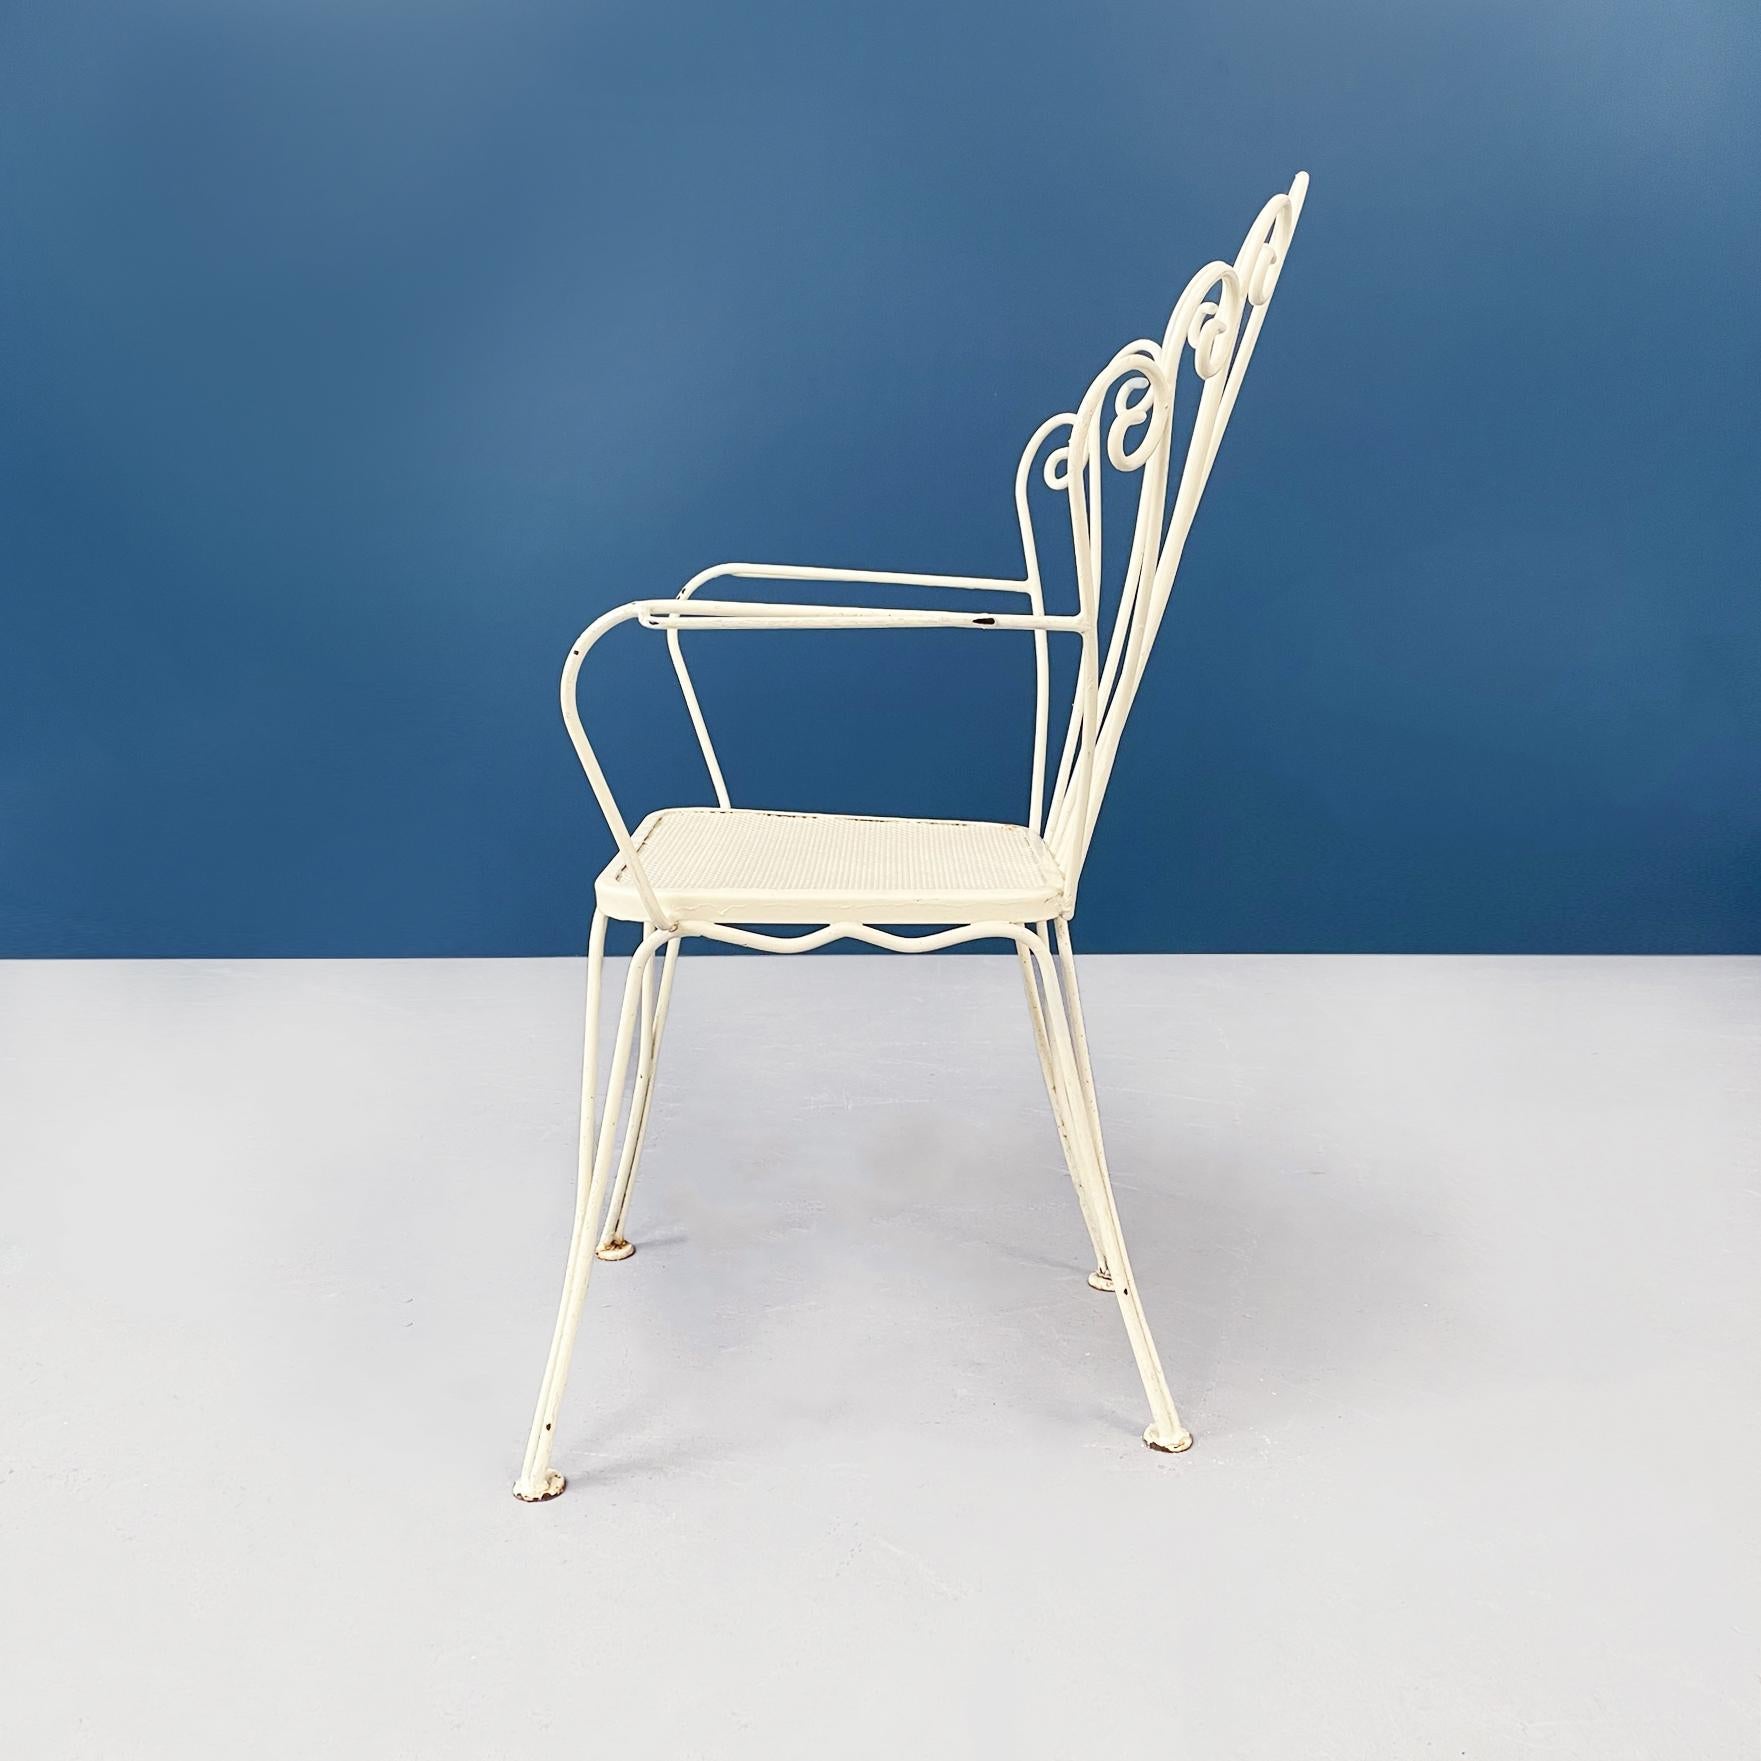 Italian Mid-Century Modern Garden Chairs in White Wrought Iron, 1960s In Good Condition For Sale In MIlano, IT